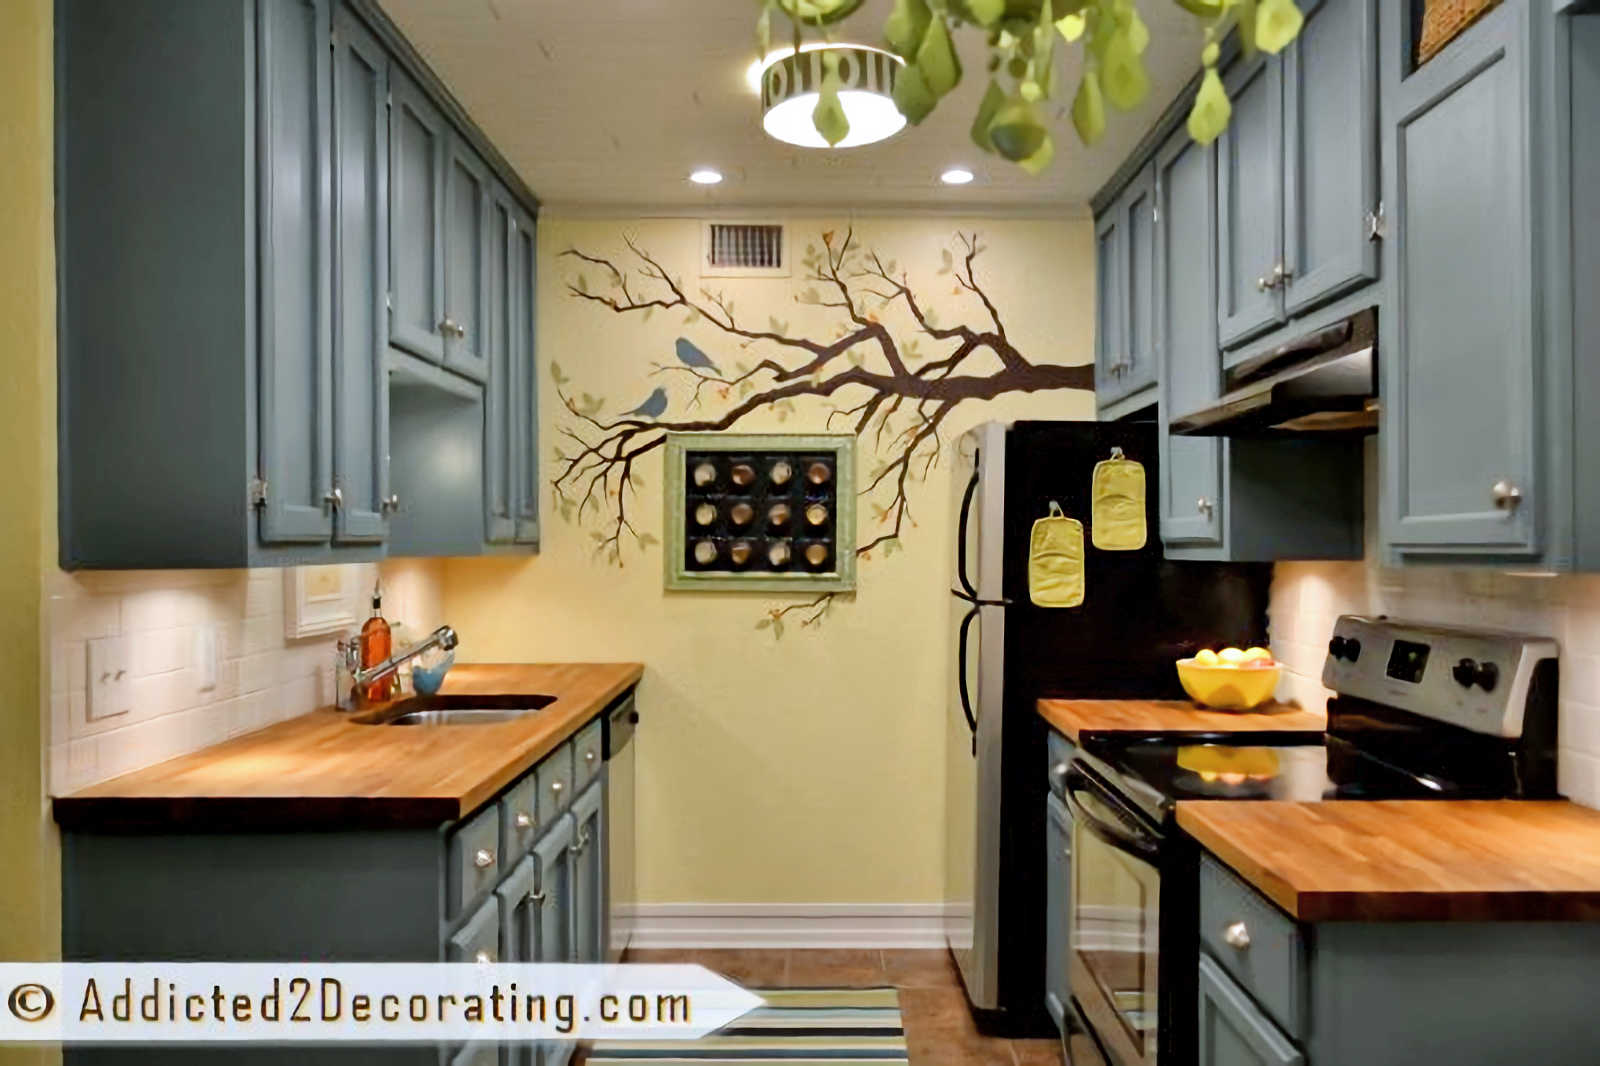 condo kitchen remodel - after with teal cabinets, yellow walls, and painted tree mural